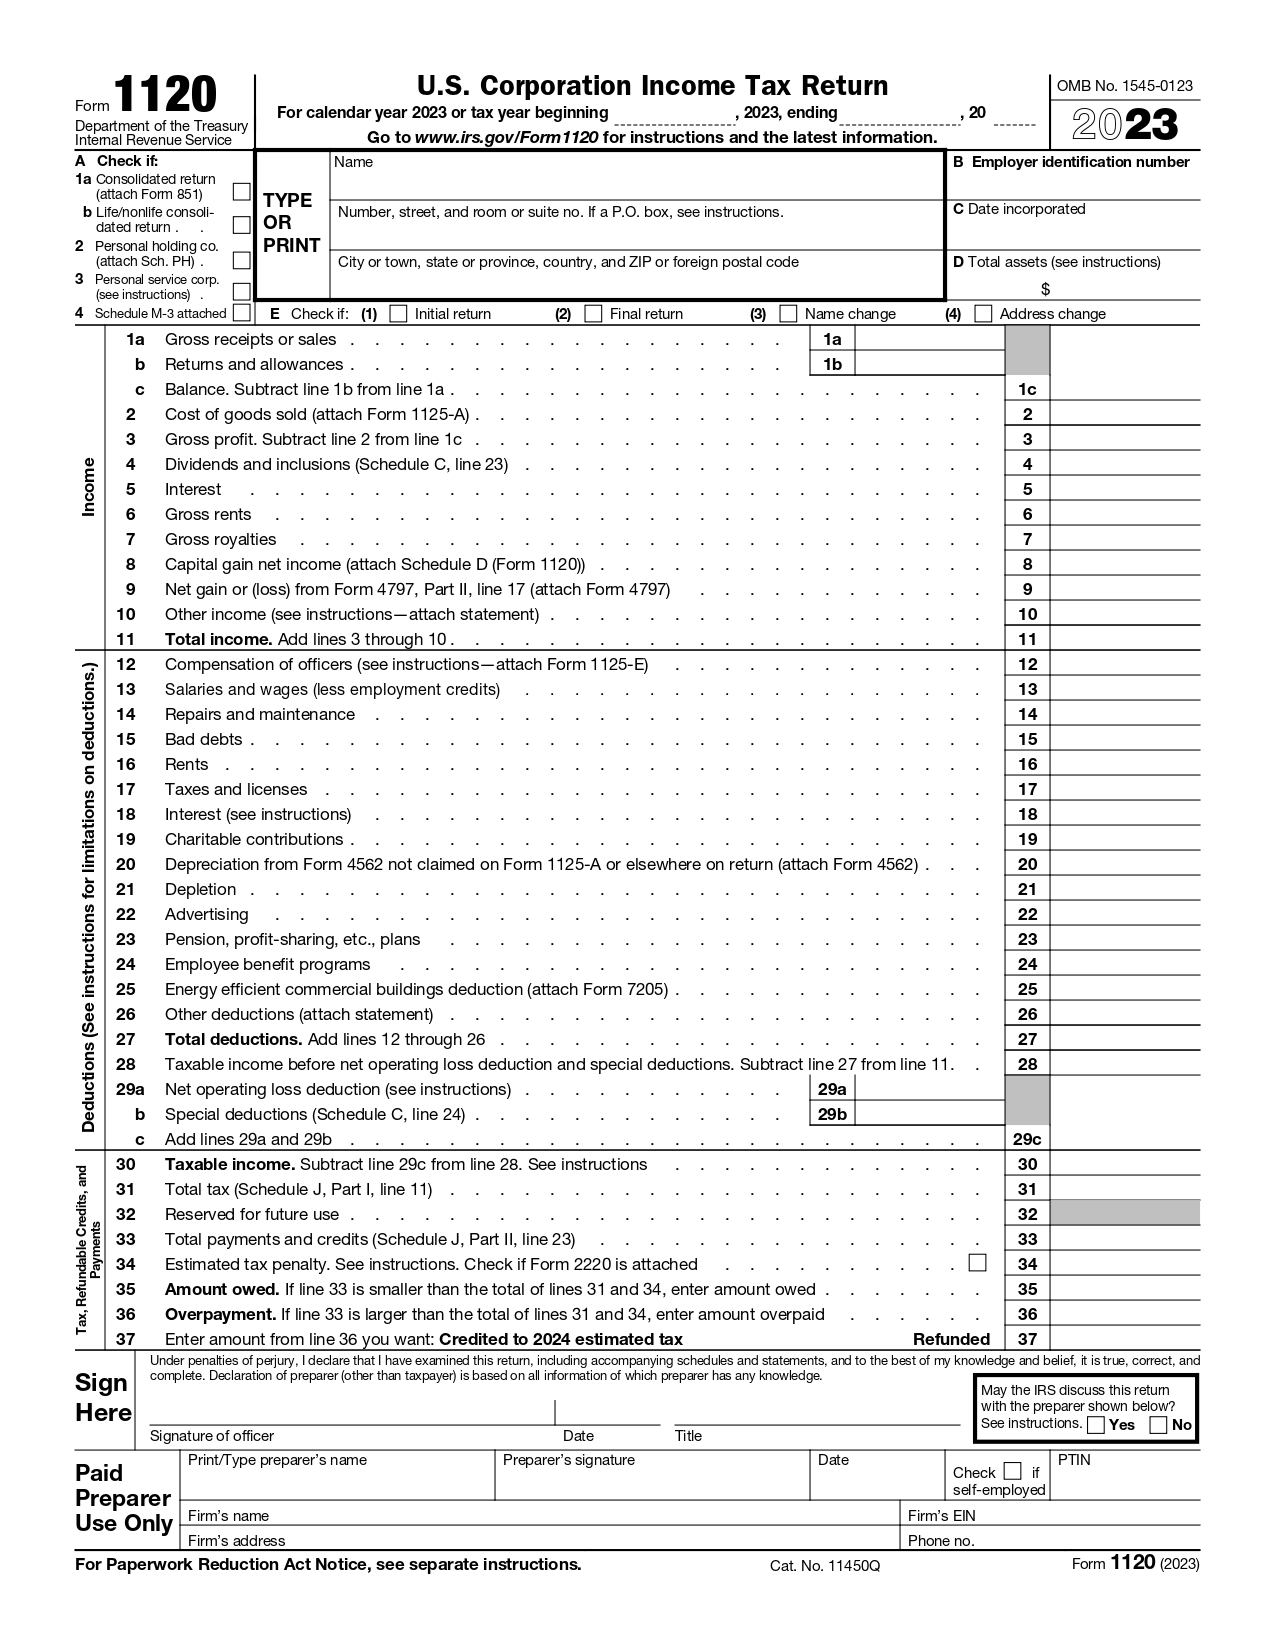 Corporate_Tax_Results_page-0001